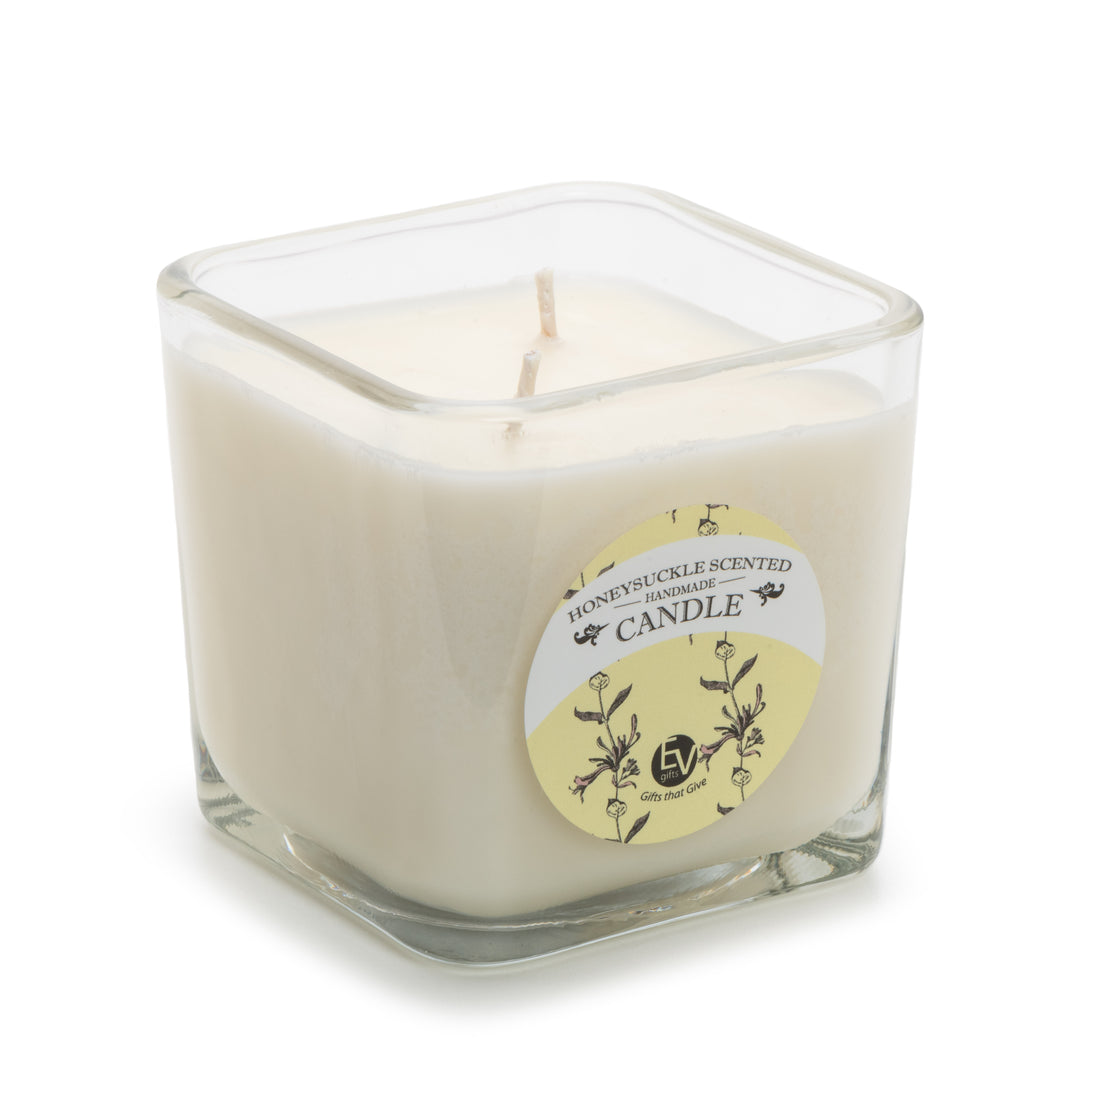 Honeysuckle Scented Soy Candle, Double Wick